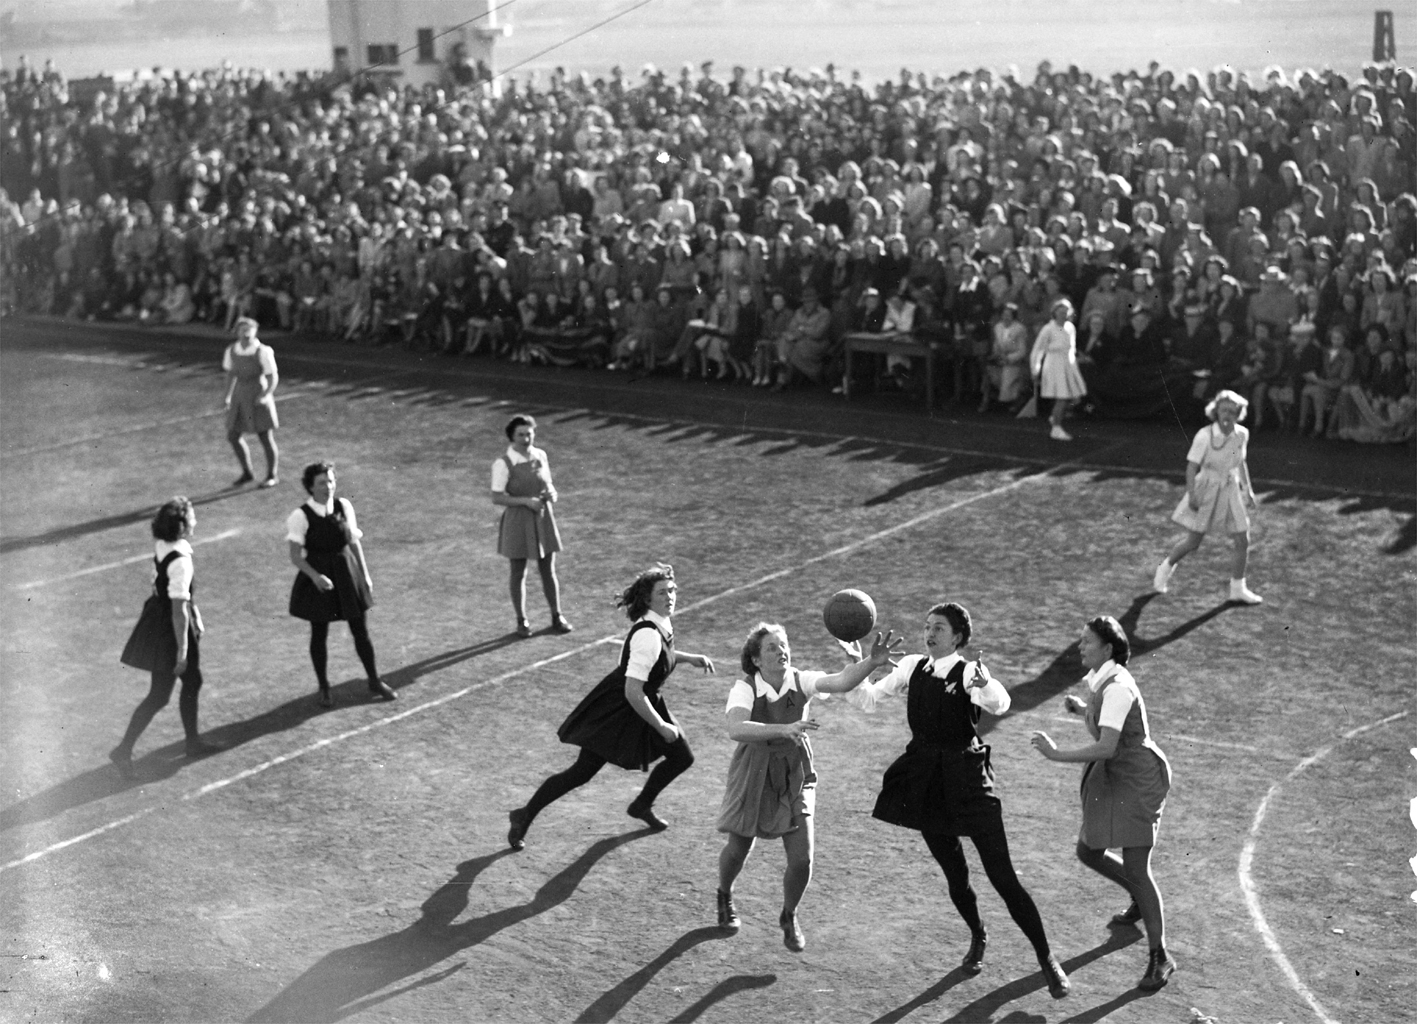 1948, Australia v. New Zealand. Game One of the test series played in front of a full crowd at Forbey Park Racecourse, Dunedin.